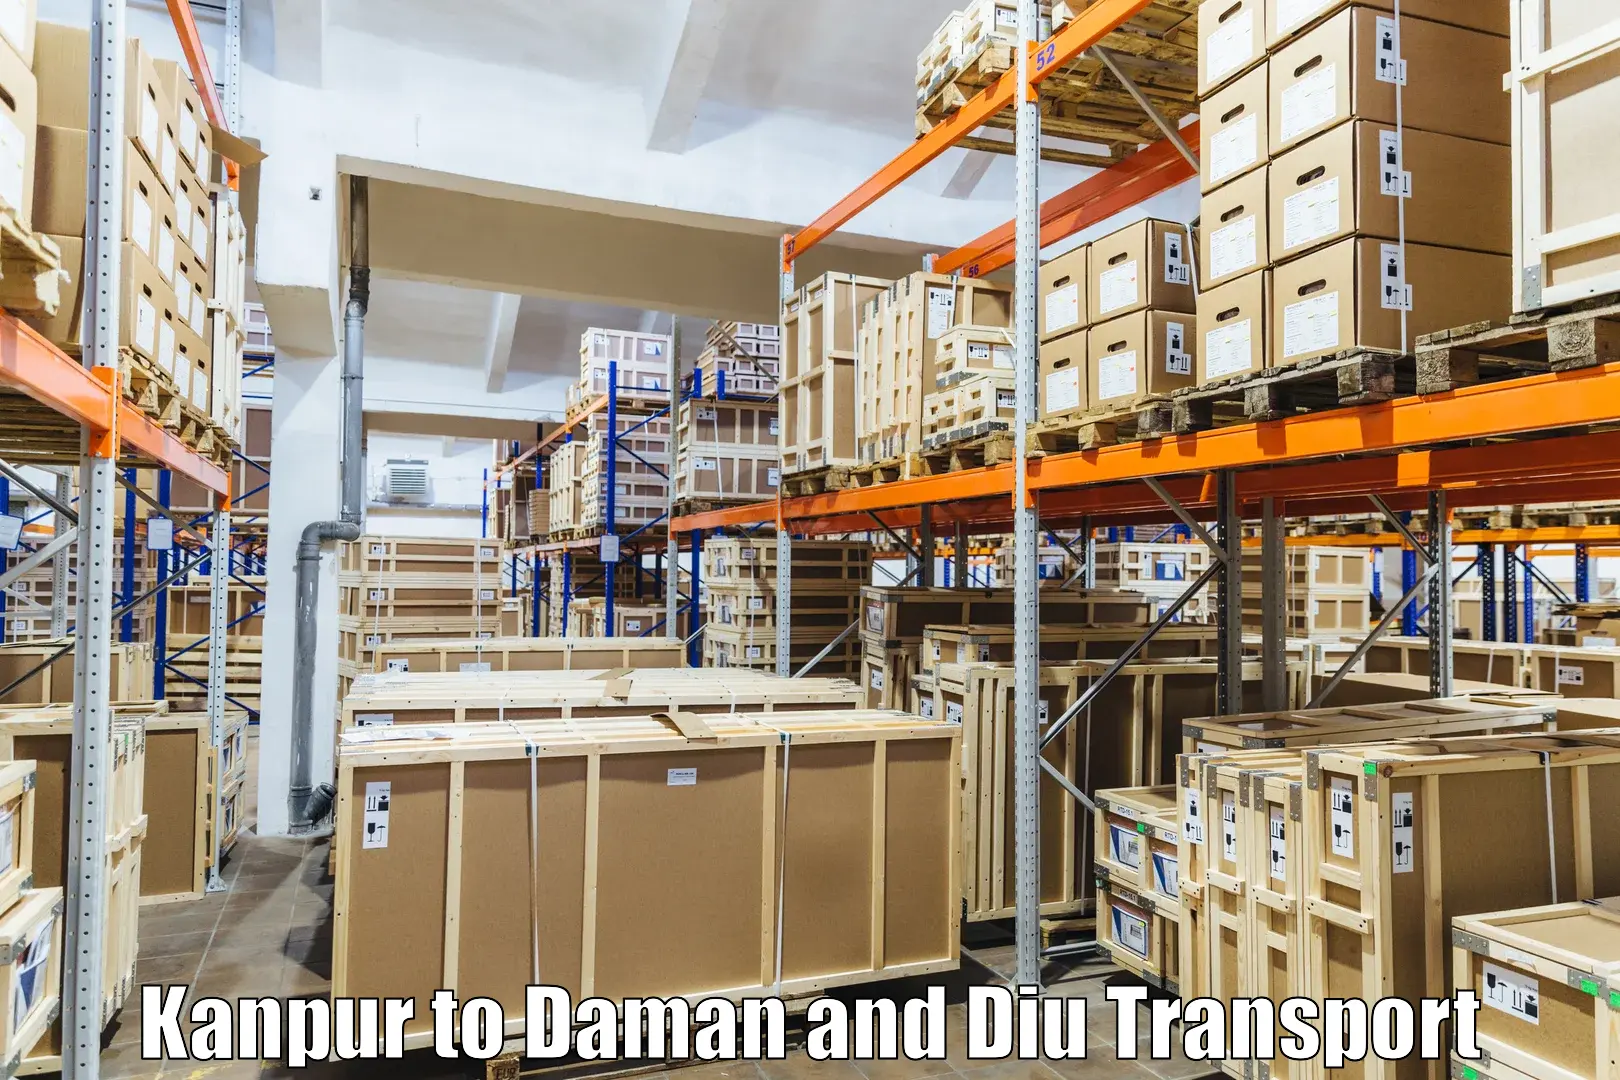 Transport shared services Kanpur to Daman and Diu